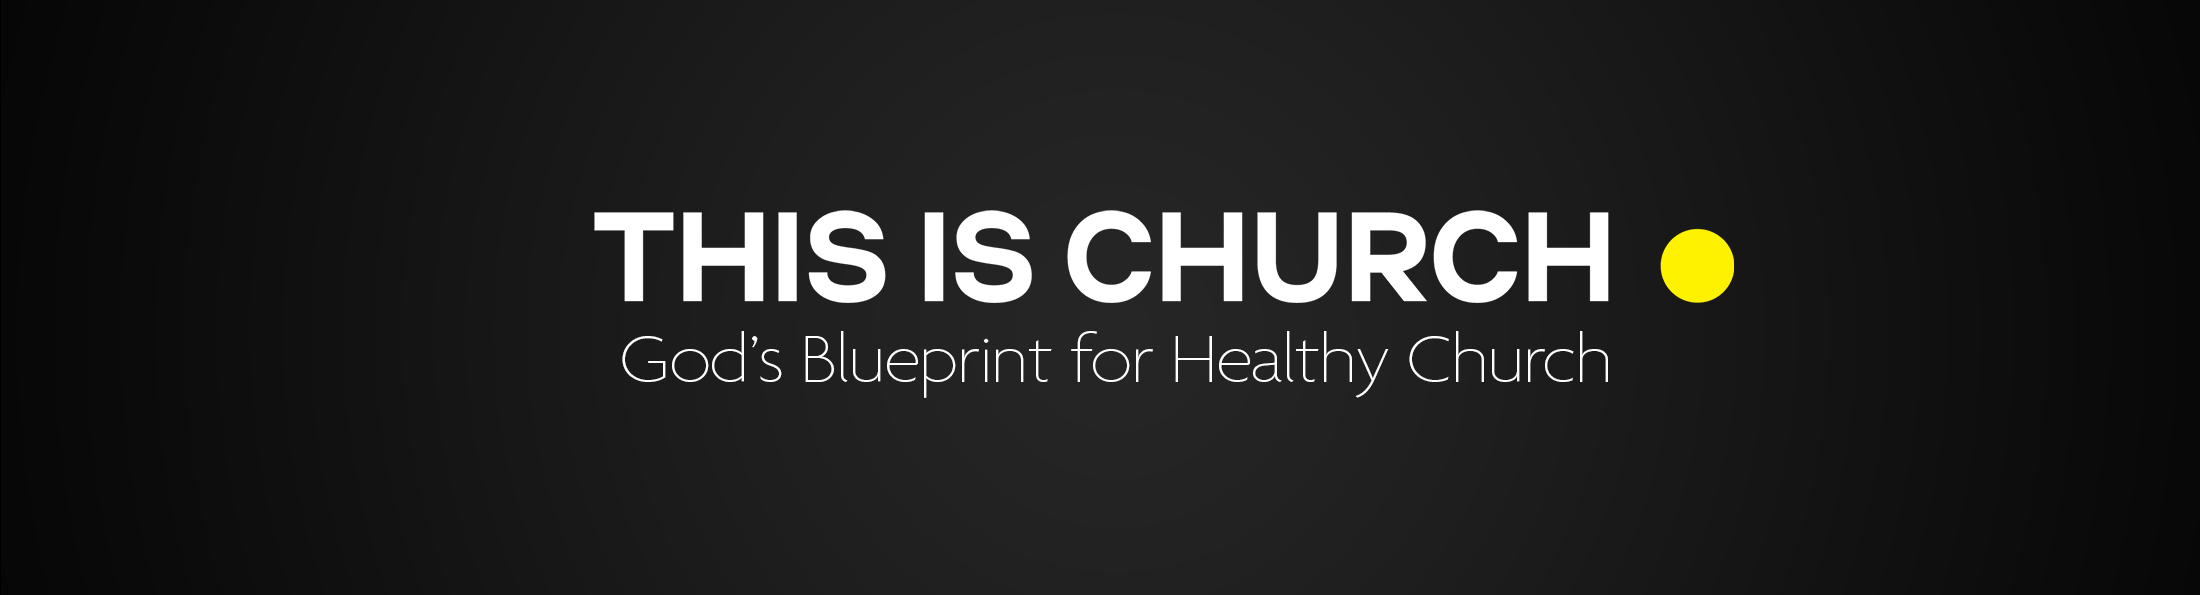 Video slider image for 'This is Church’ about God’s blueprint for healthy church